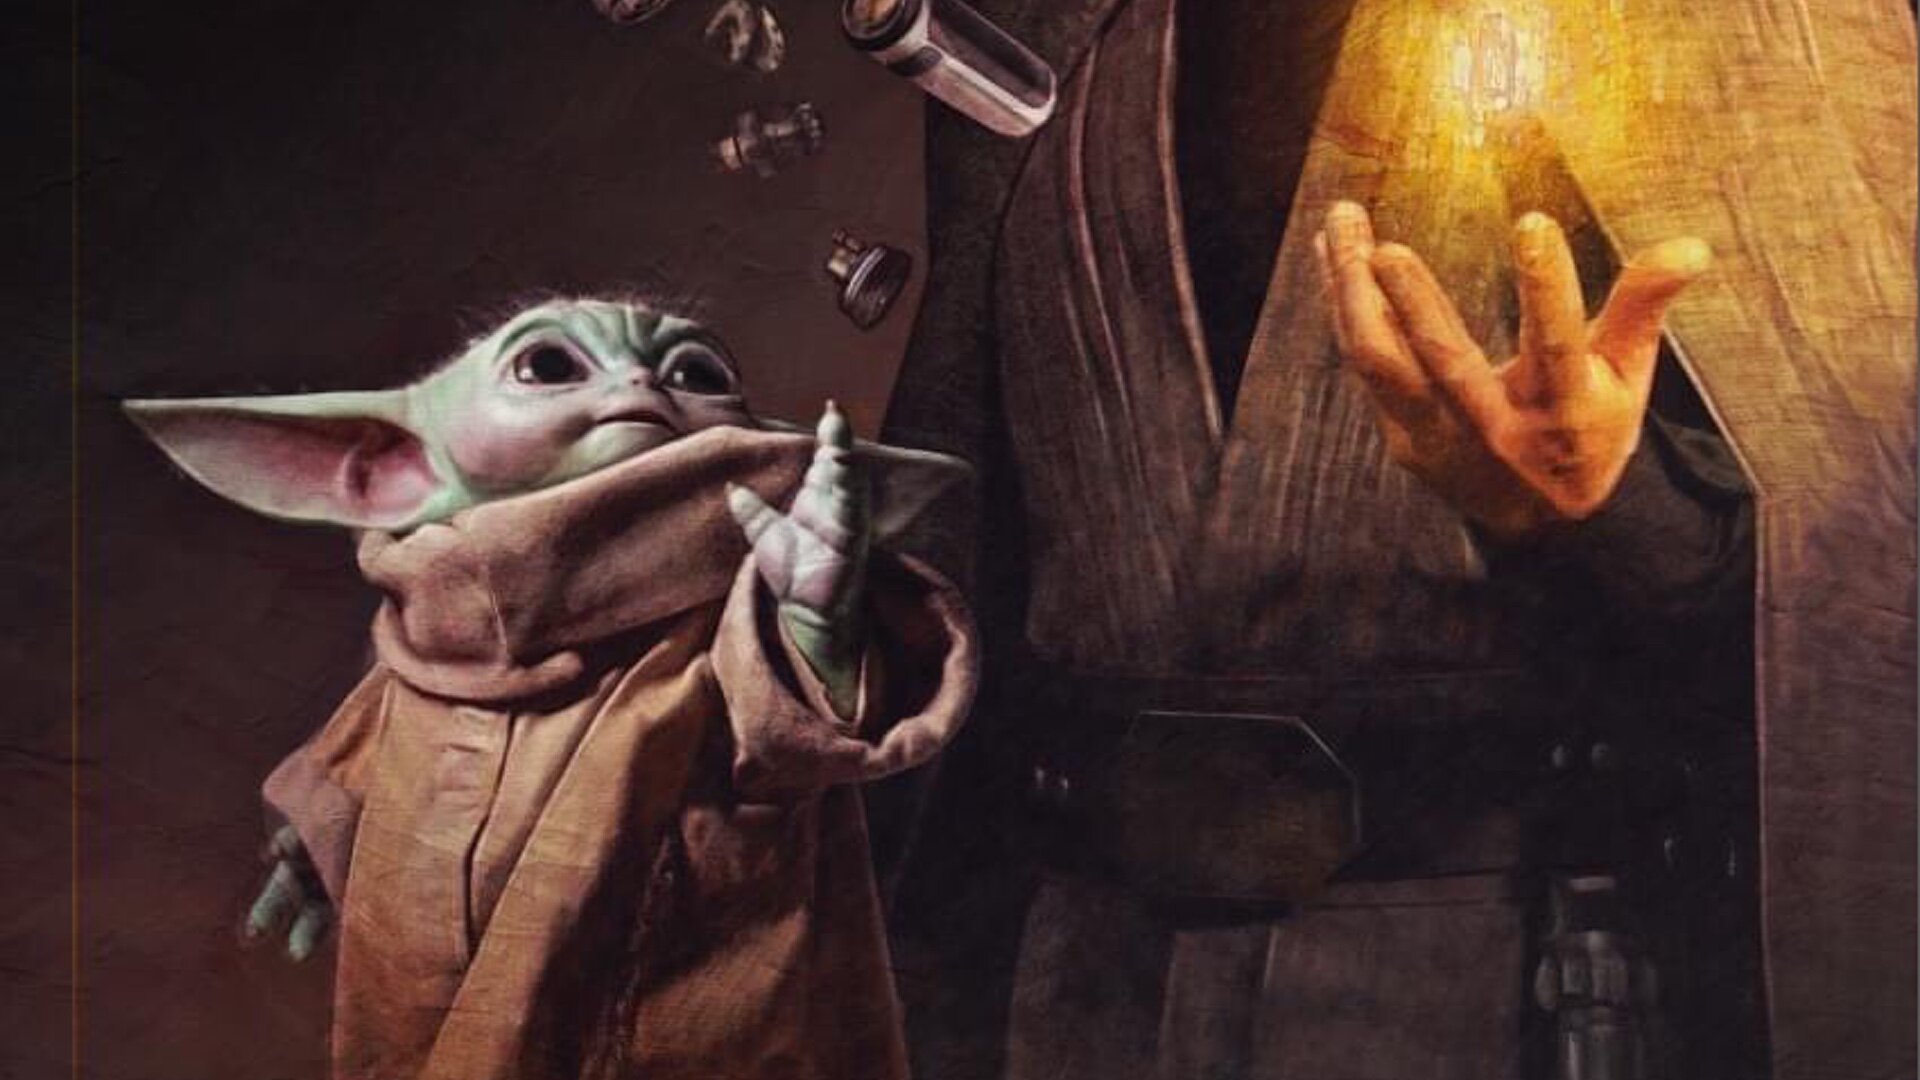 New Official STAR WARS Art Features Luke Skywalker and Grogu Building a Lightsaber with The Force